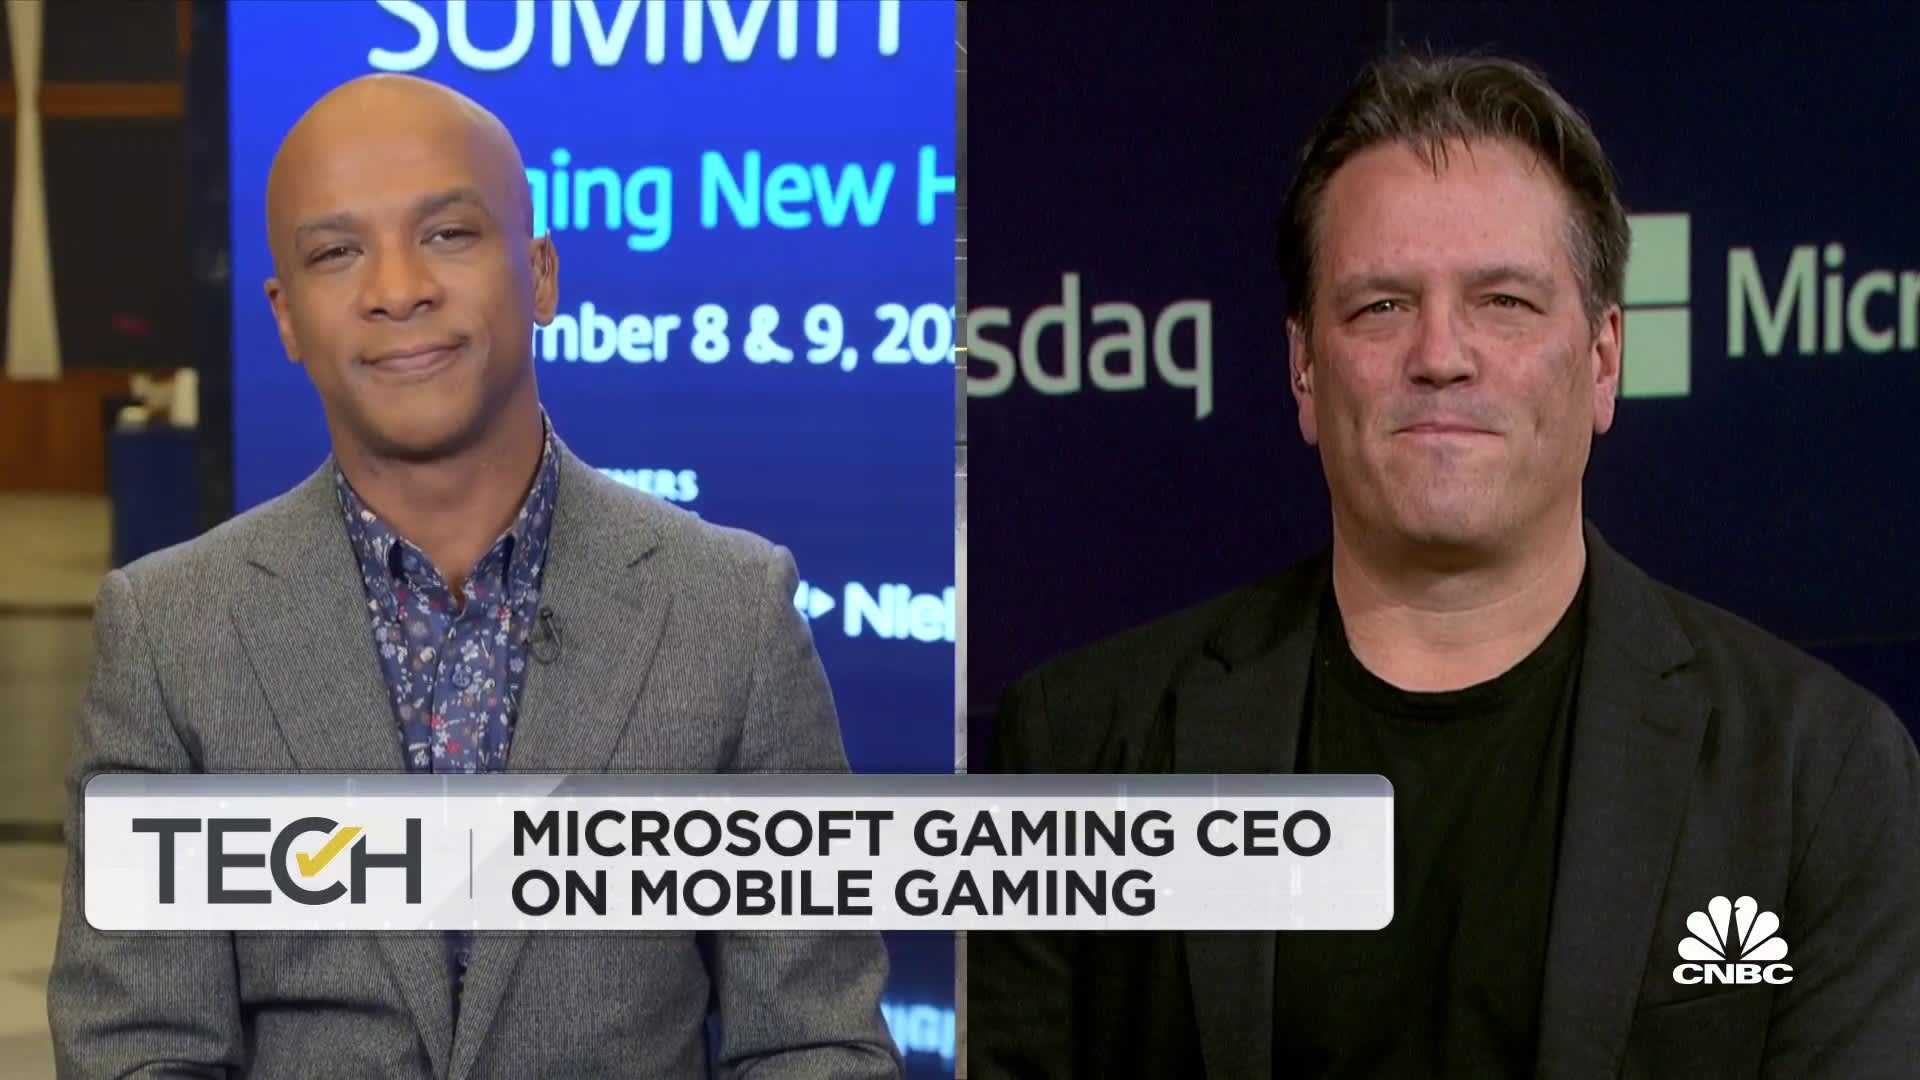 Microsoft's Gaming CEO Spent 917 Hours Playing Xbox Games This